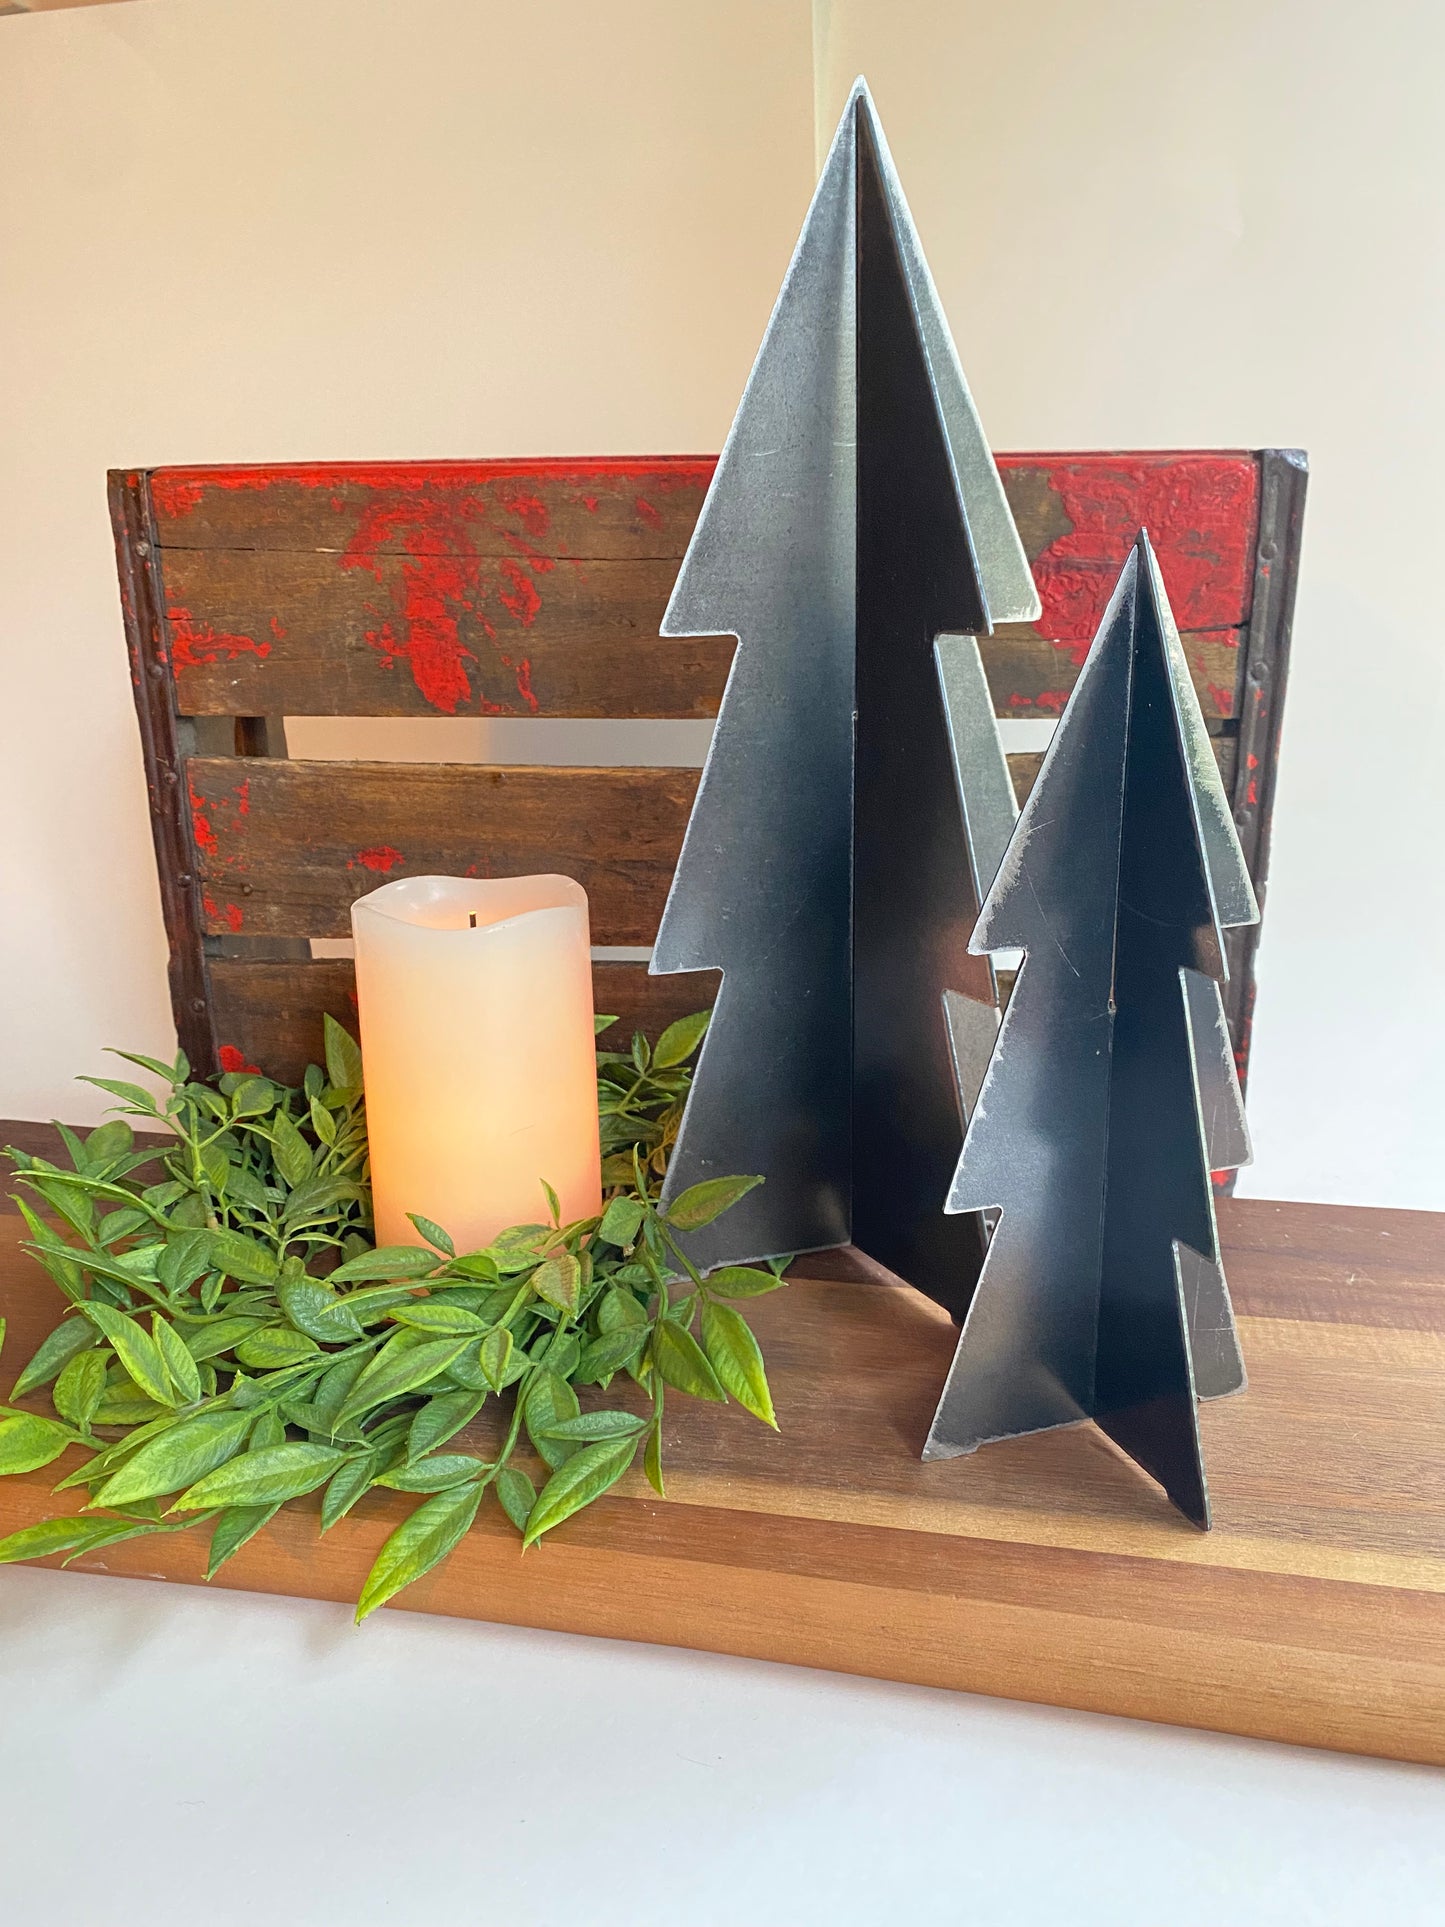 Introducing our 3D Christmas Trees: The Perfect Year-Round Decor!